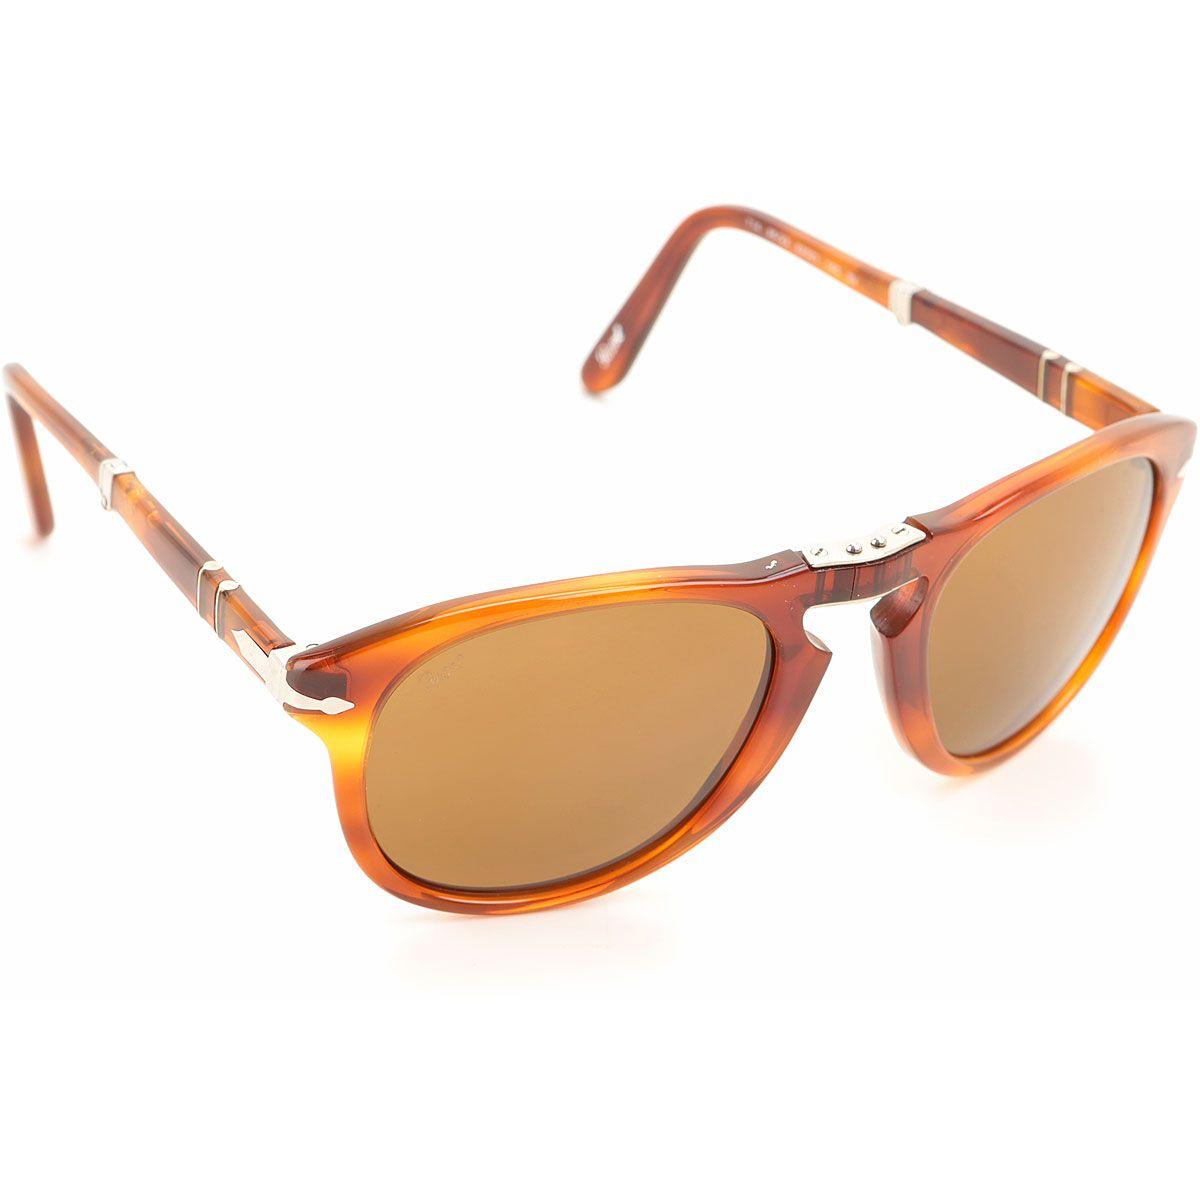 Persol Logo - Persol Sunglasses On Sale, 2019 Sunglasses Size, On Code: Po0714-96-33.  Item Sale, | Coupon Code Available